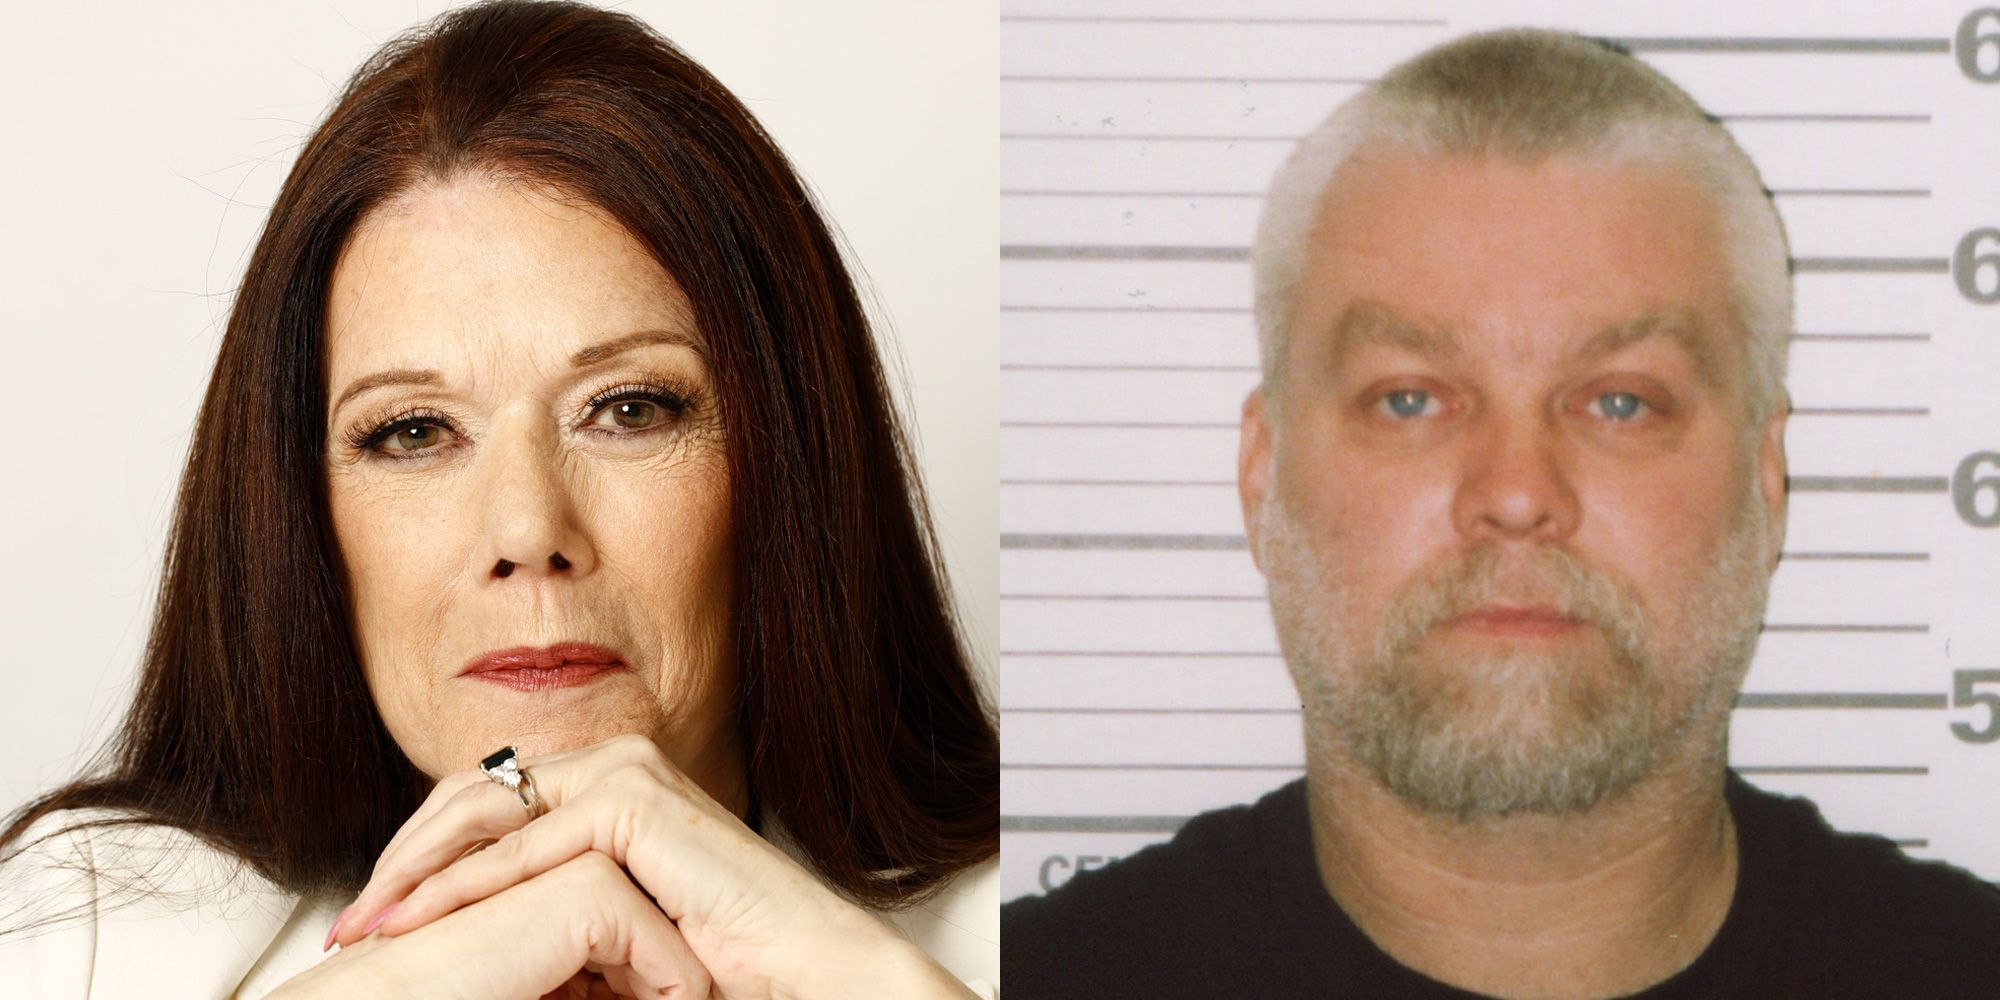 Full Story of Wisconsin Inmate Confessing to Steven Avery's Case in 'Making  a Murderer